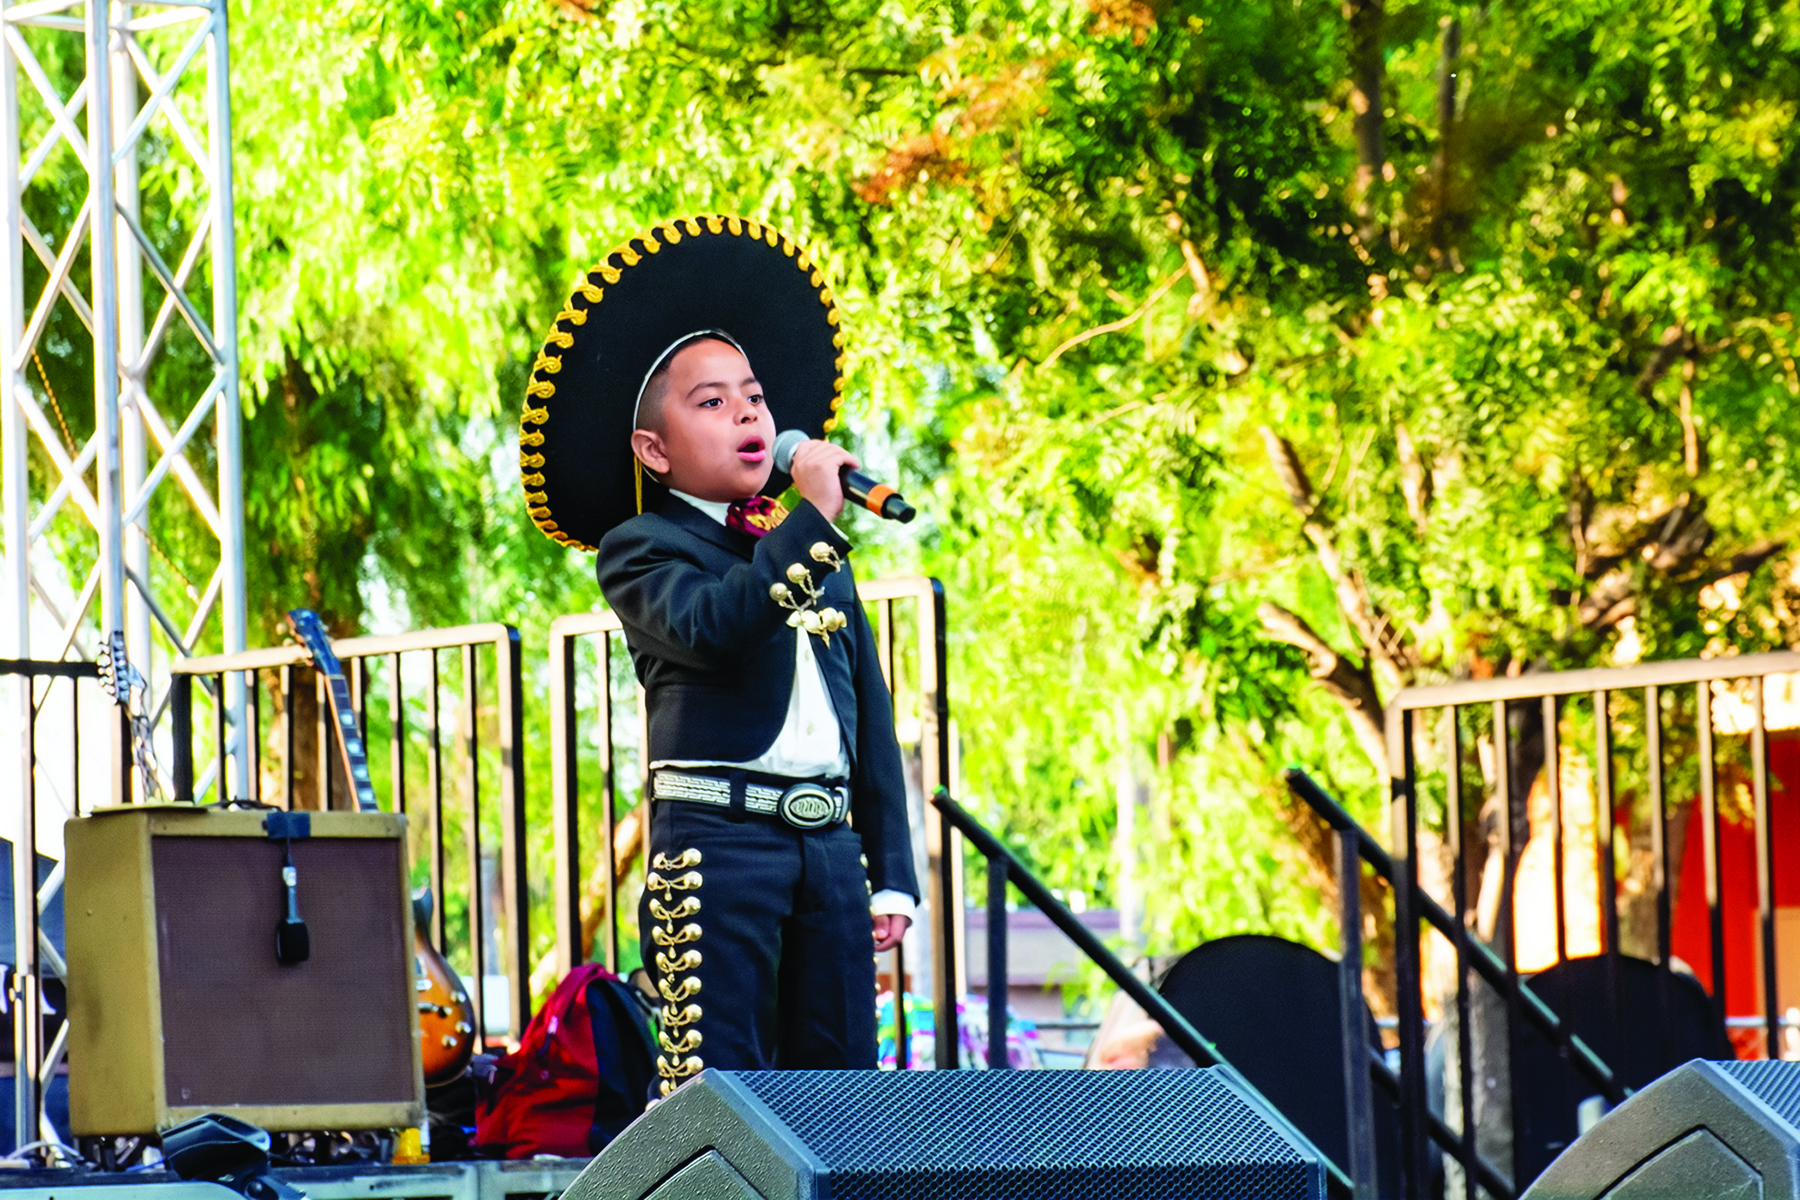 Save the Date for the Fiestas Patrias Festival